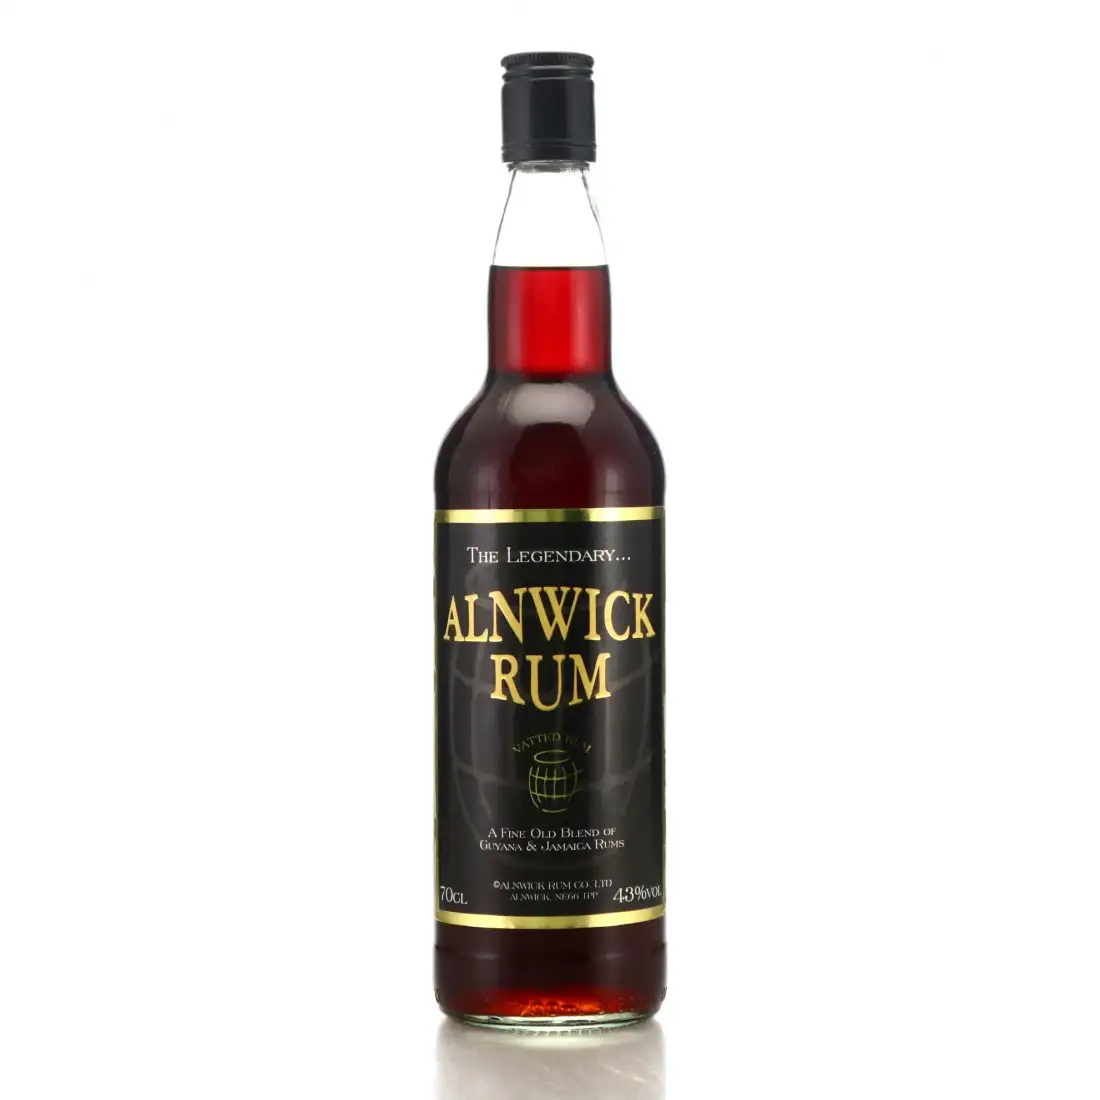 Image of the front of the bottle of the rum The Legendary